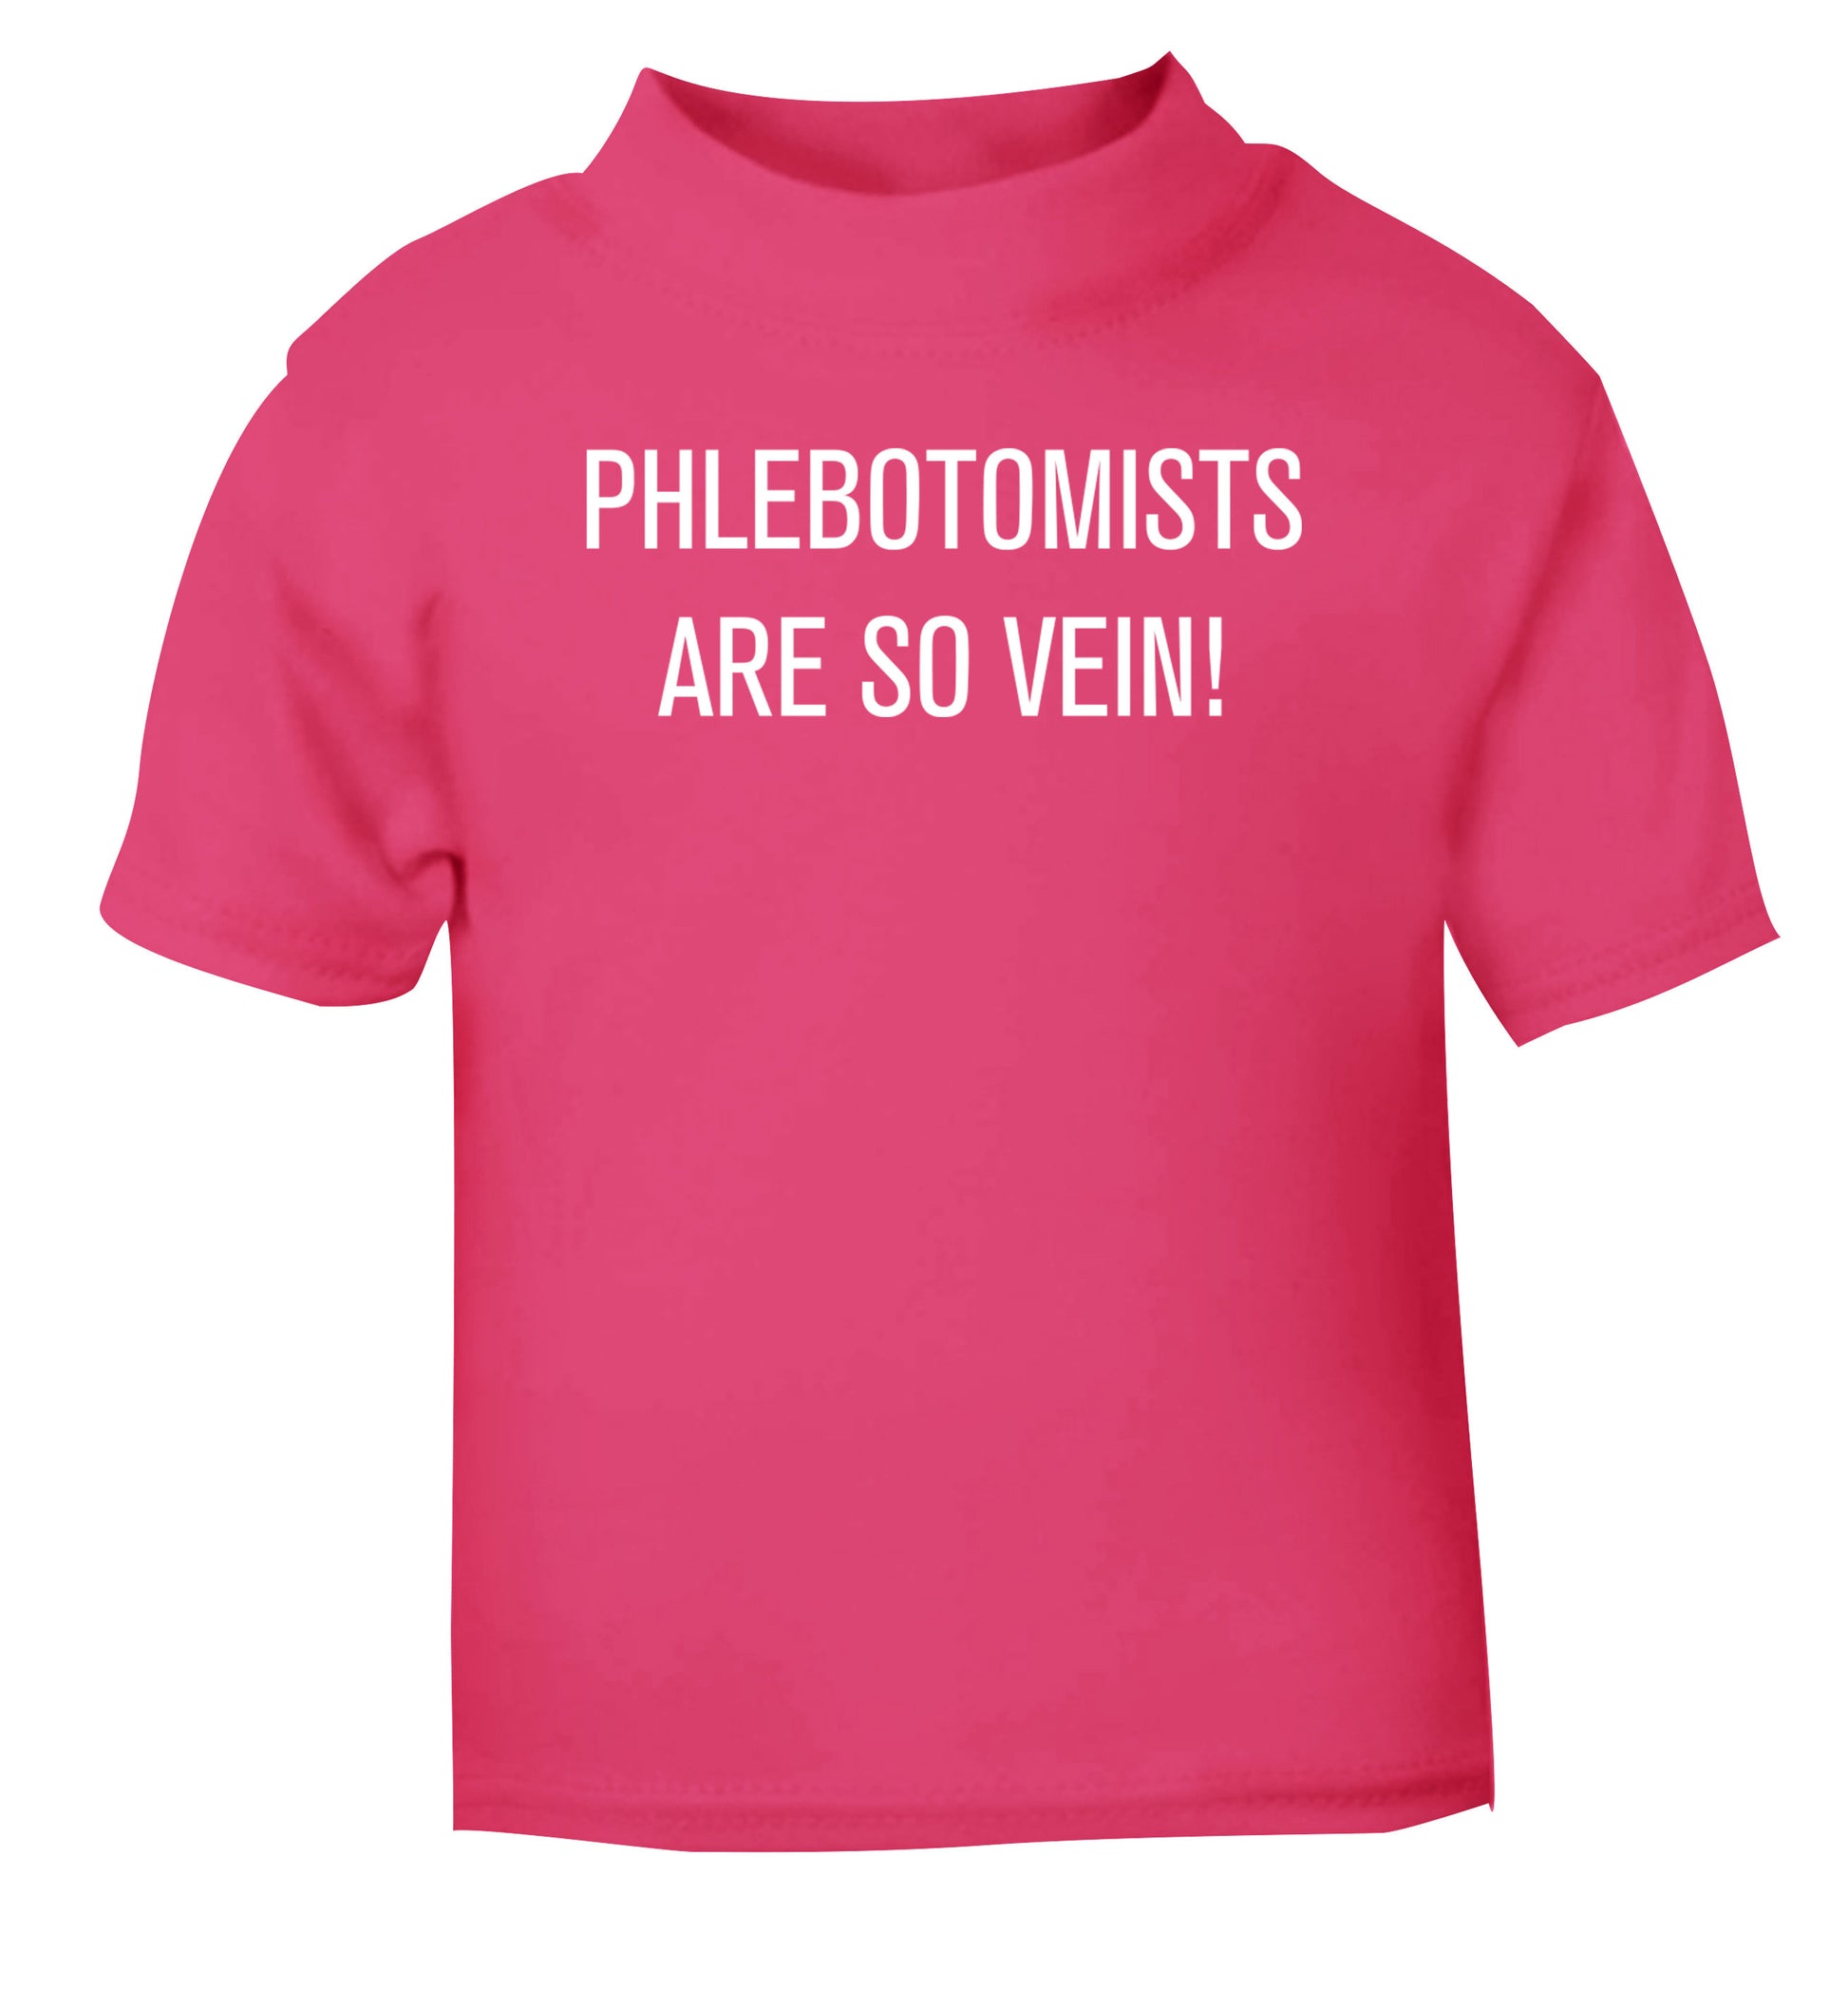 Phlebotomists are so vein! pink Baby Toddler Tshirt 2 Years